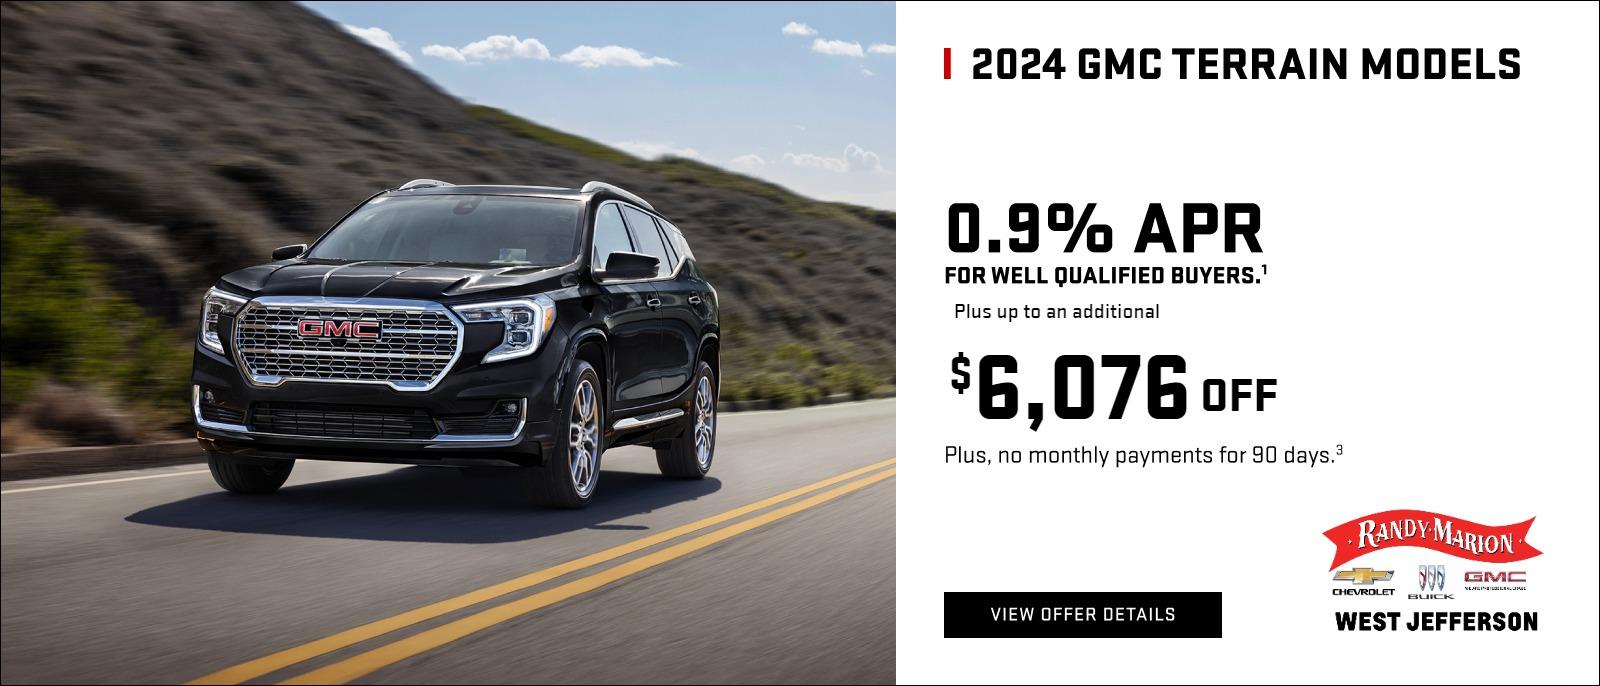 Save u to $6,076 off on the new GMC Terrain, plus well qualified buyers get 0.9% APR, plus no payment for 90 days.